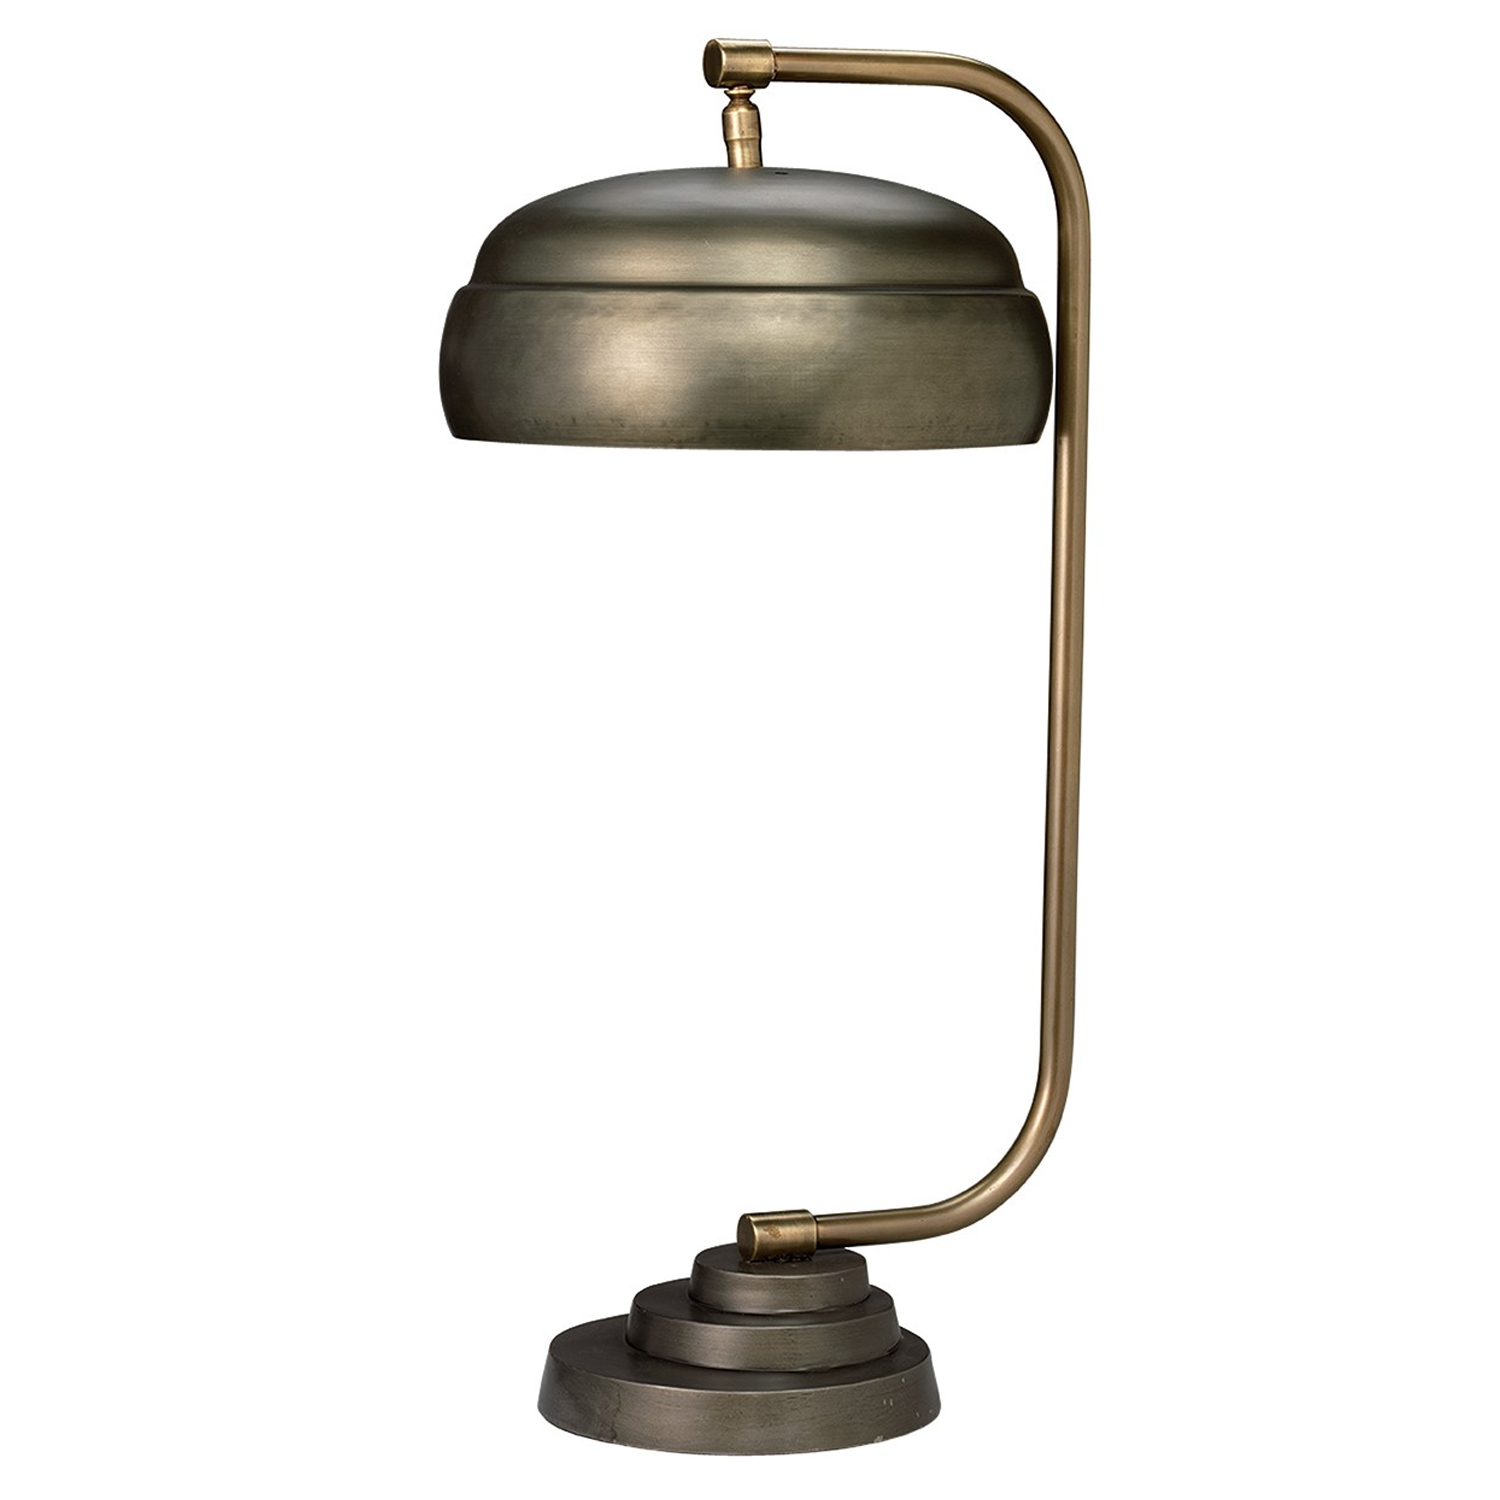 Jamie Young Co Steam Punk Table Lamp Products In 2019 within size 1500 X 1500